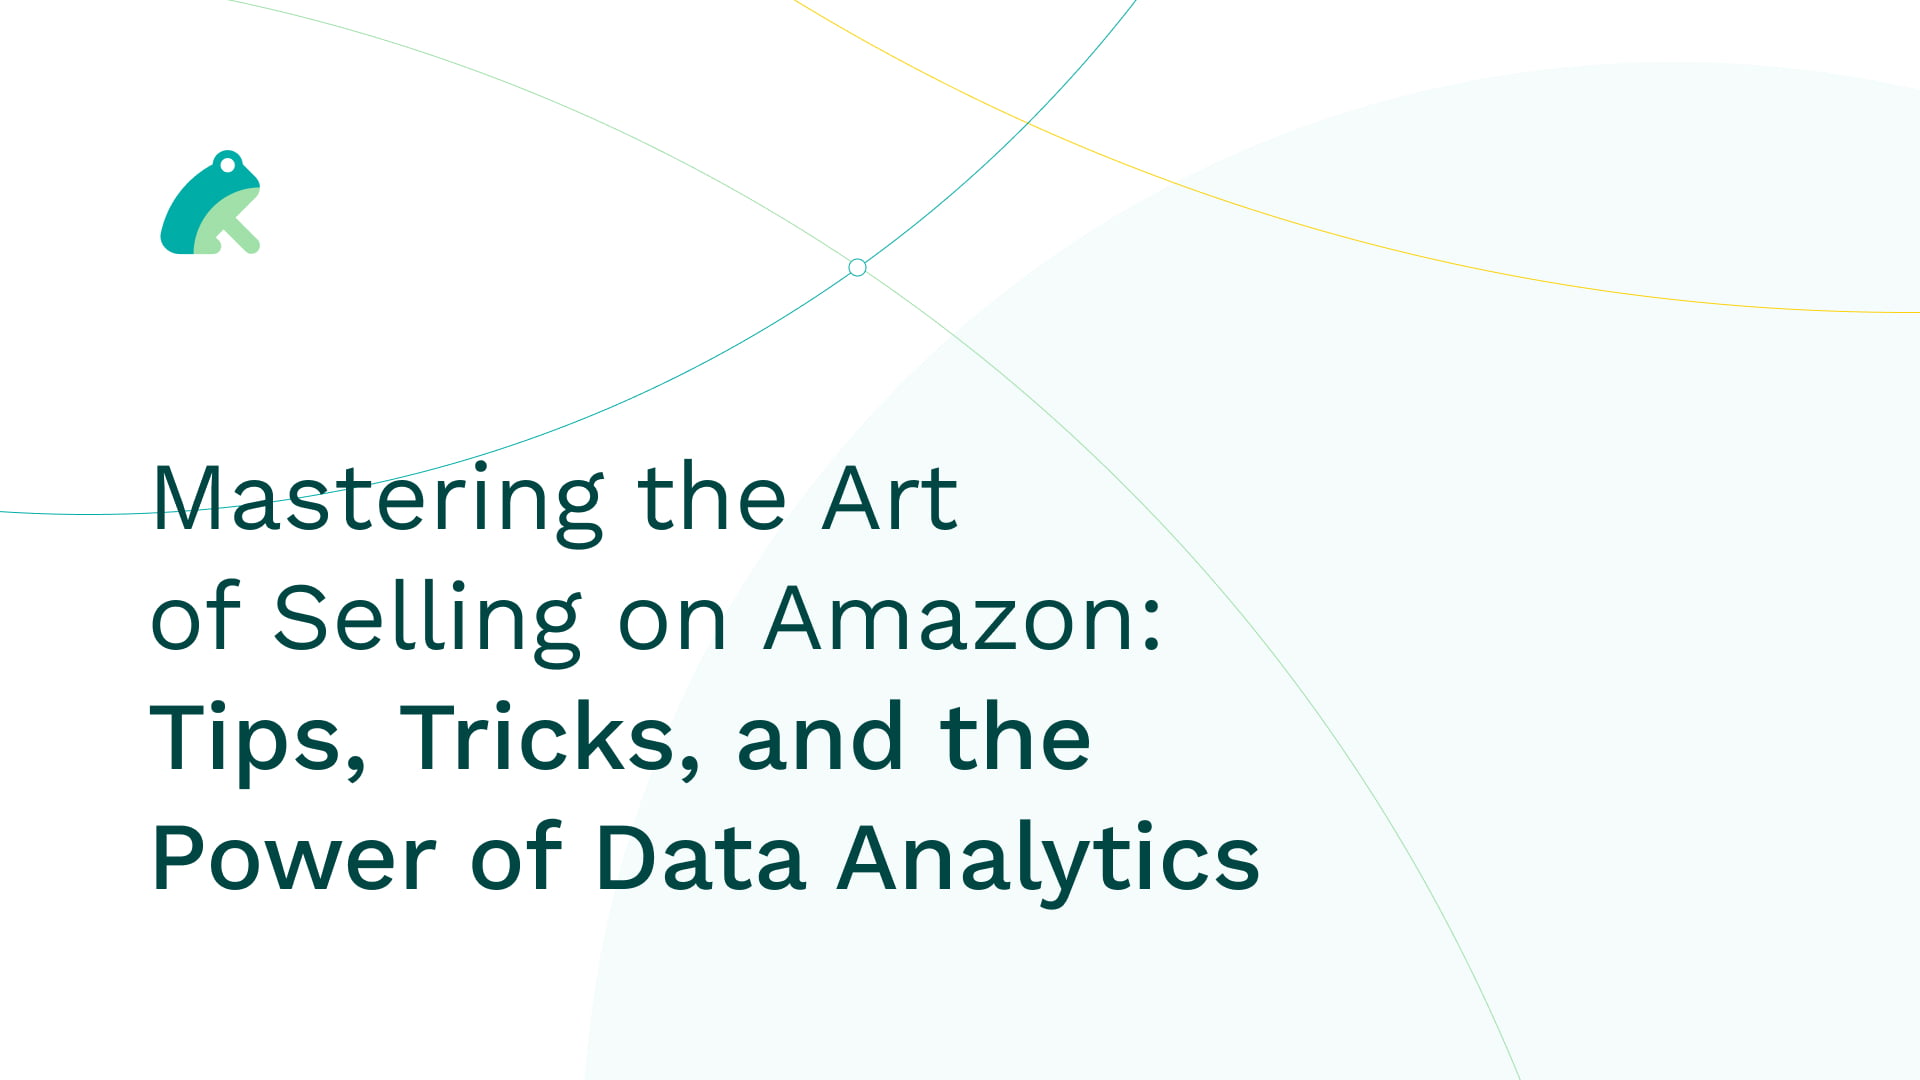 Mastering the Art of Selling on Amazon: Tips, Tricks, and the Power of Data Analytics